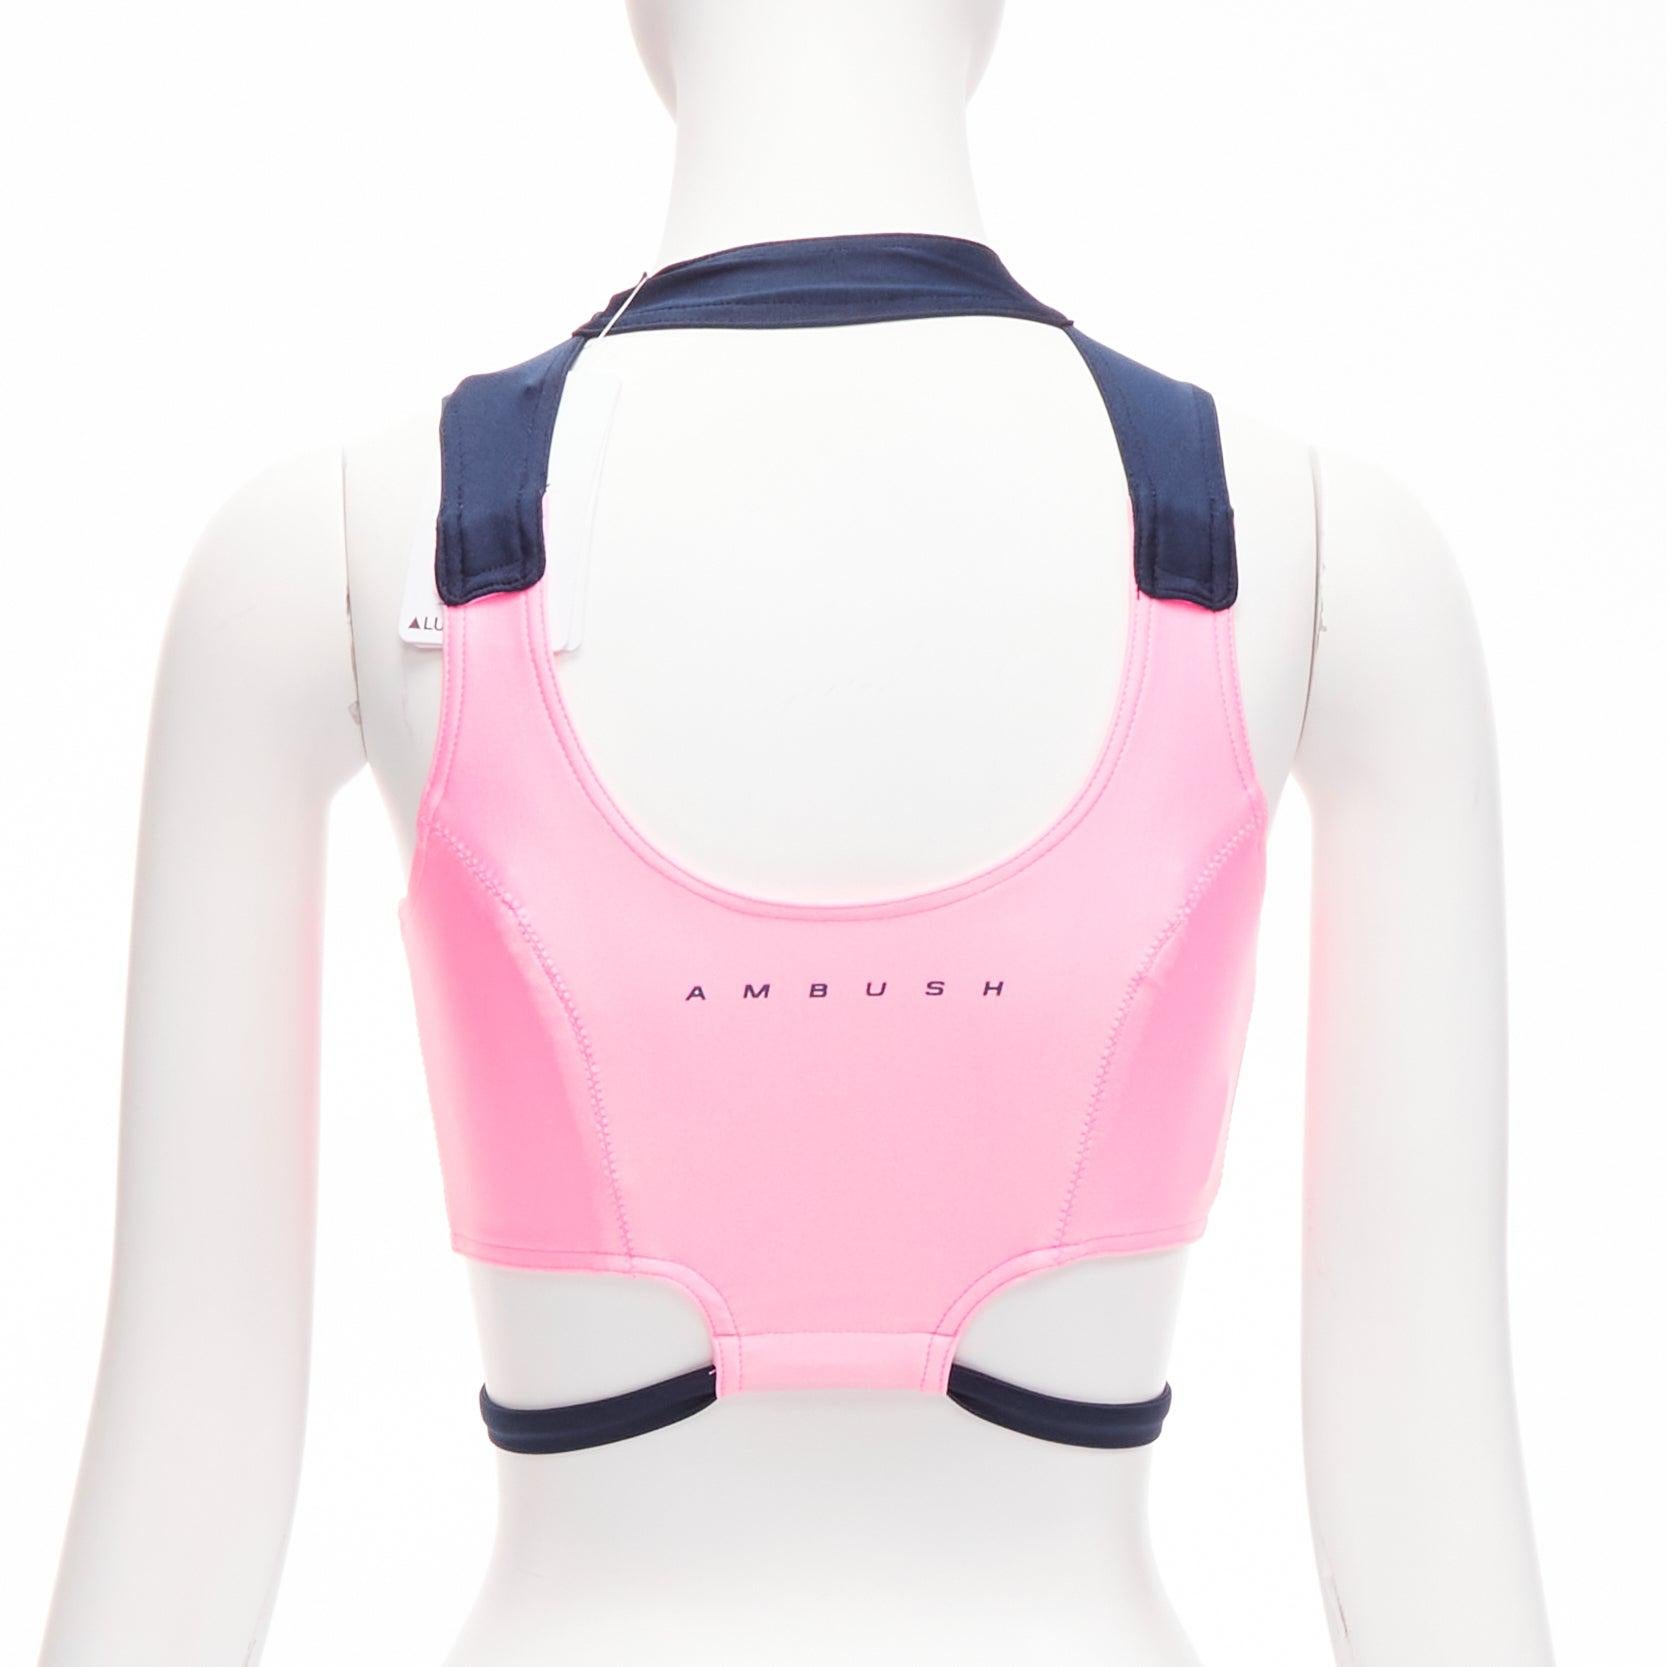 new AMBUSH pink navy panelled logo back waist tie cropped sports top Size 1 S
Reference: BSHW/A00031
Brand: Ambush
Material: Polyester, Blend
Color: Navy, Pink
Pattern: Solid
Closure: Snap Buttons
Extra Details: Snap button back neck closure.
Made